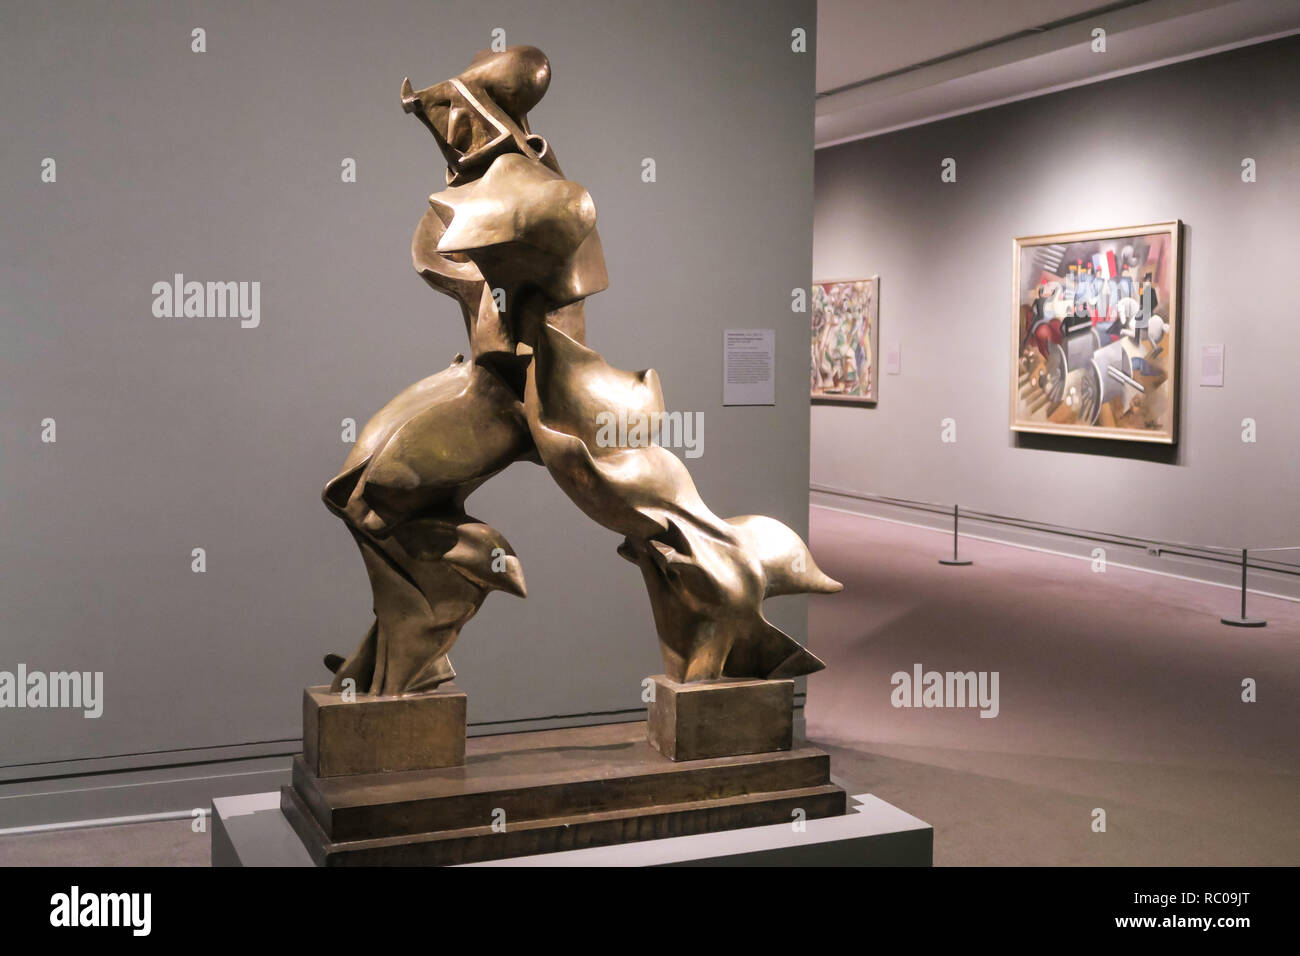 Umberto Boccioni's bronze sculpture is in the modern and contemporary art gallery in the Metropolitan Museum of Art, New York City, USA Stock Photo